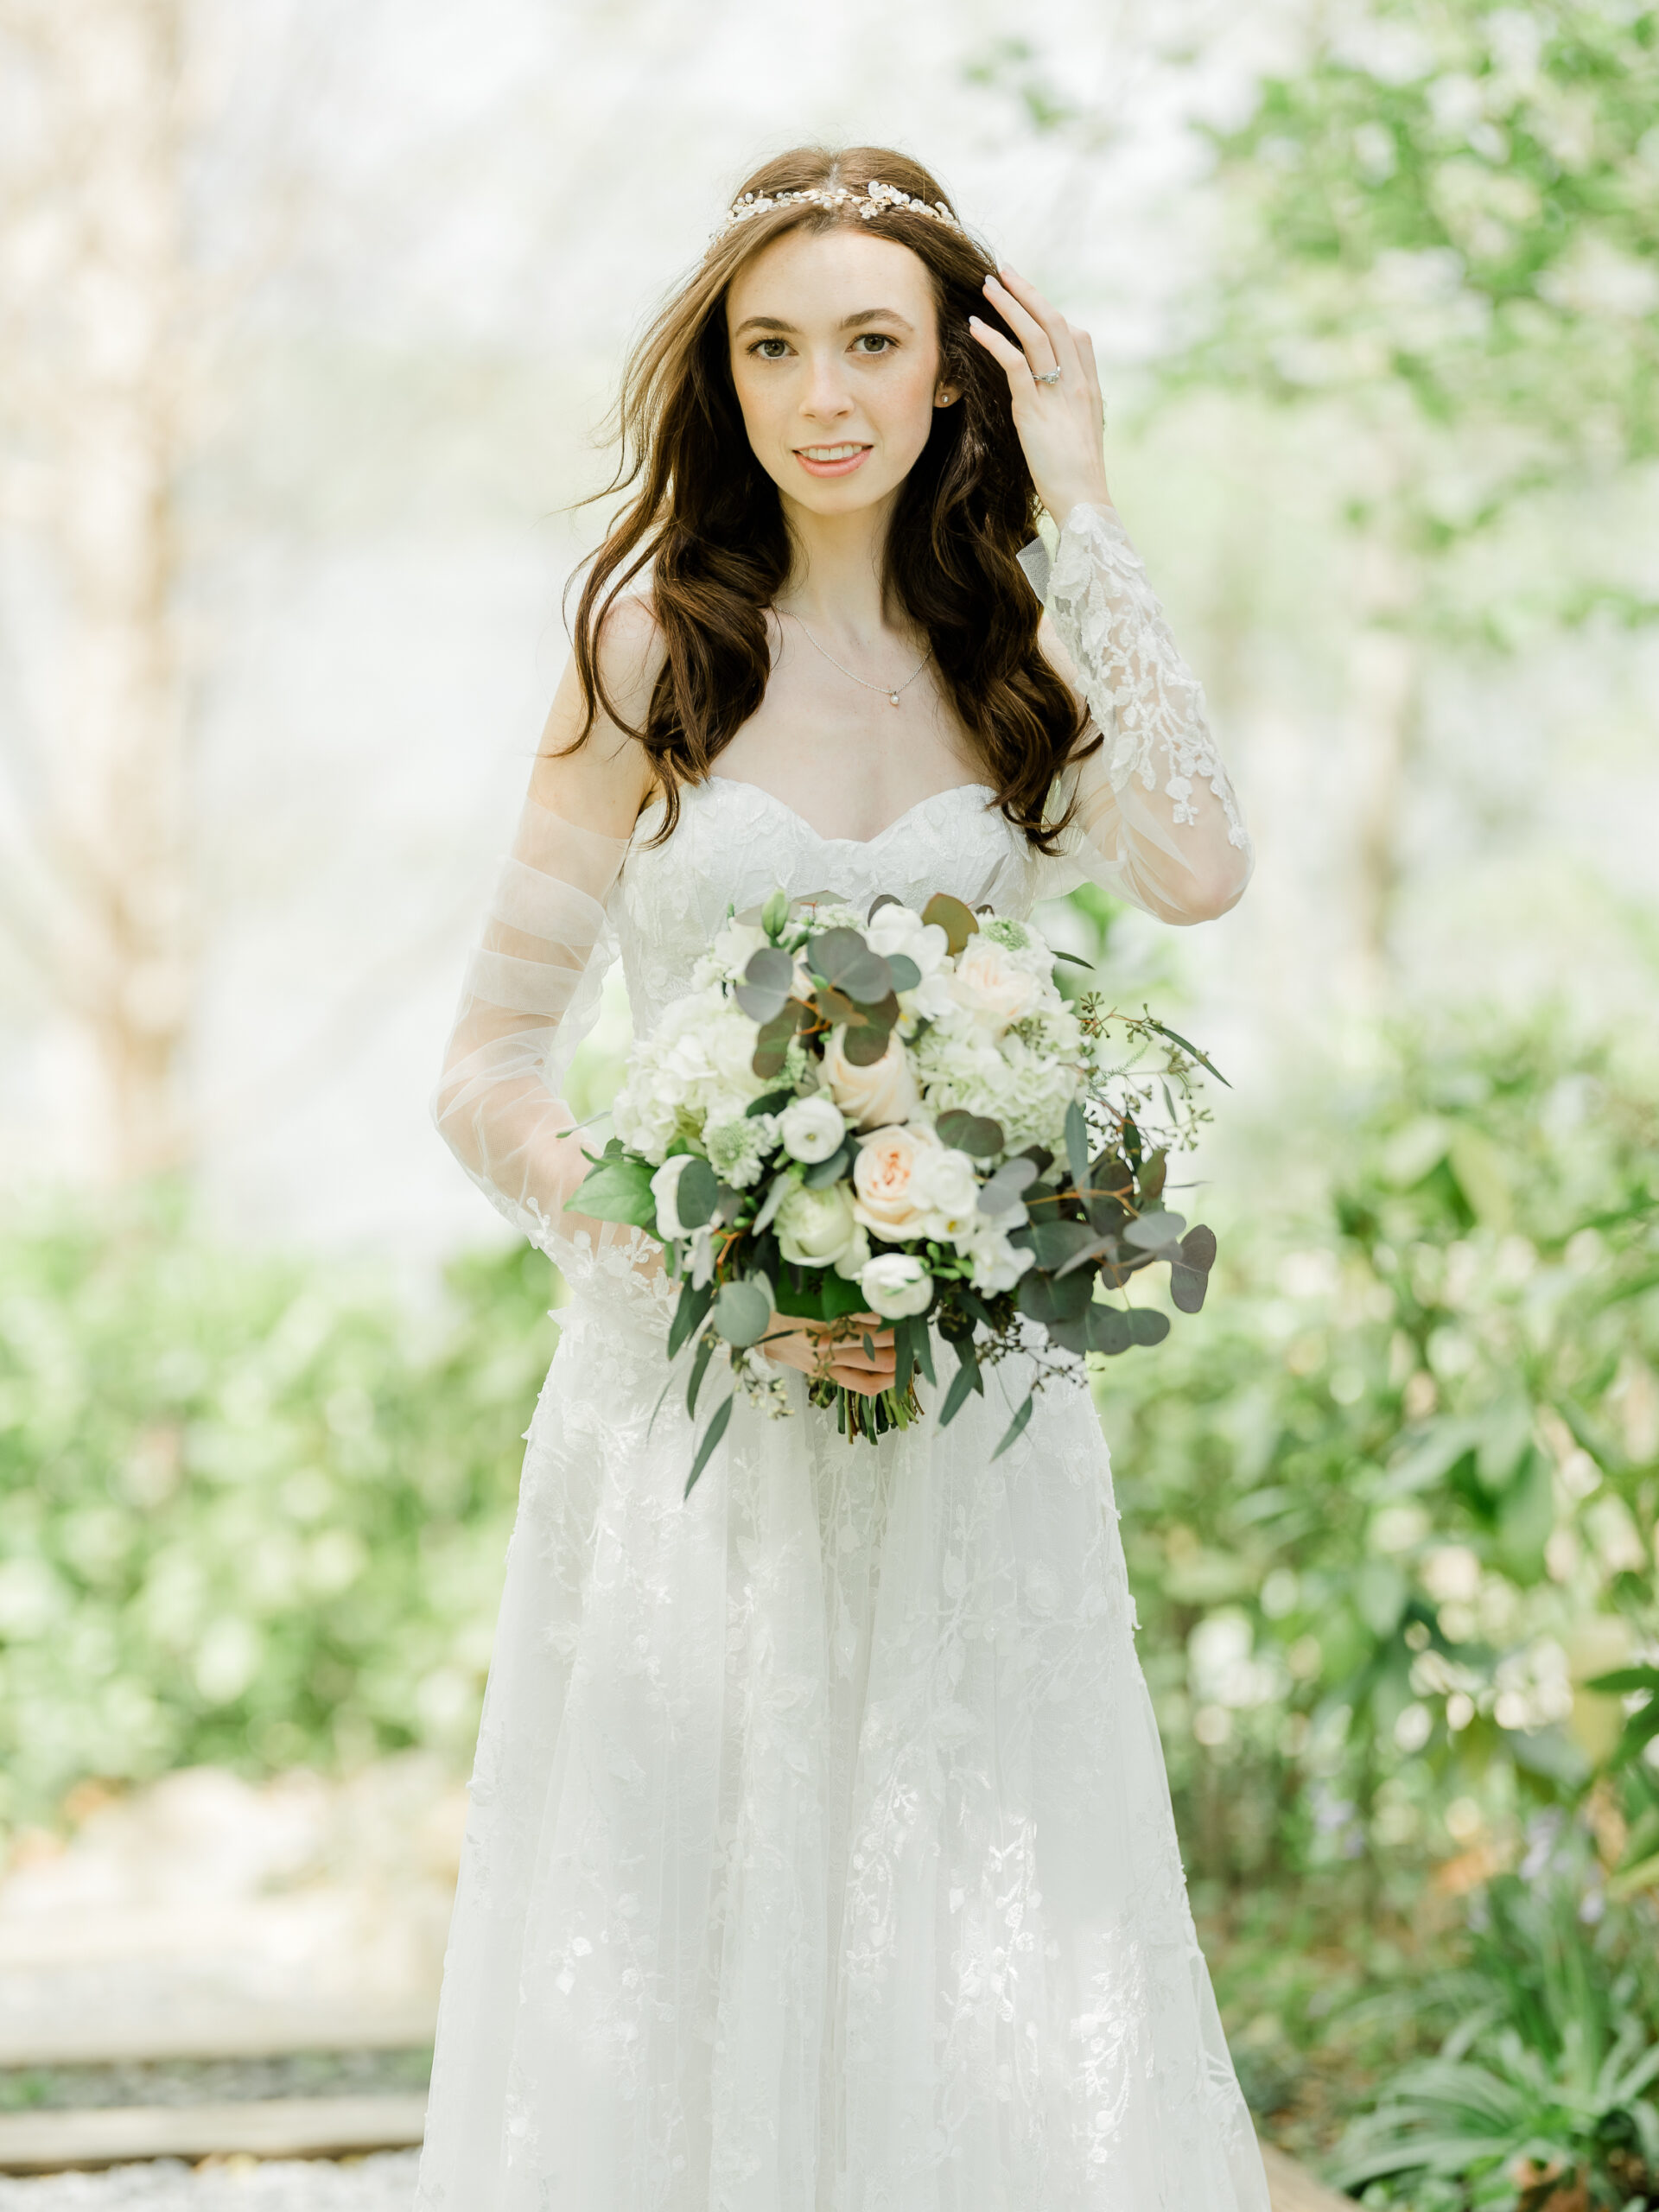 A stunning bride poses for the camera in a garden in Annapolis, Maryland.